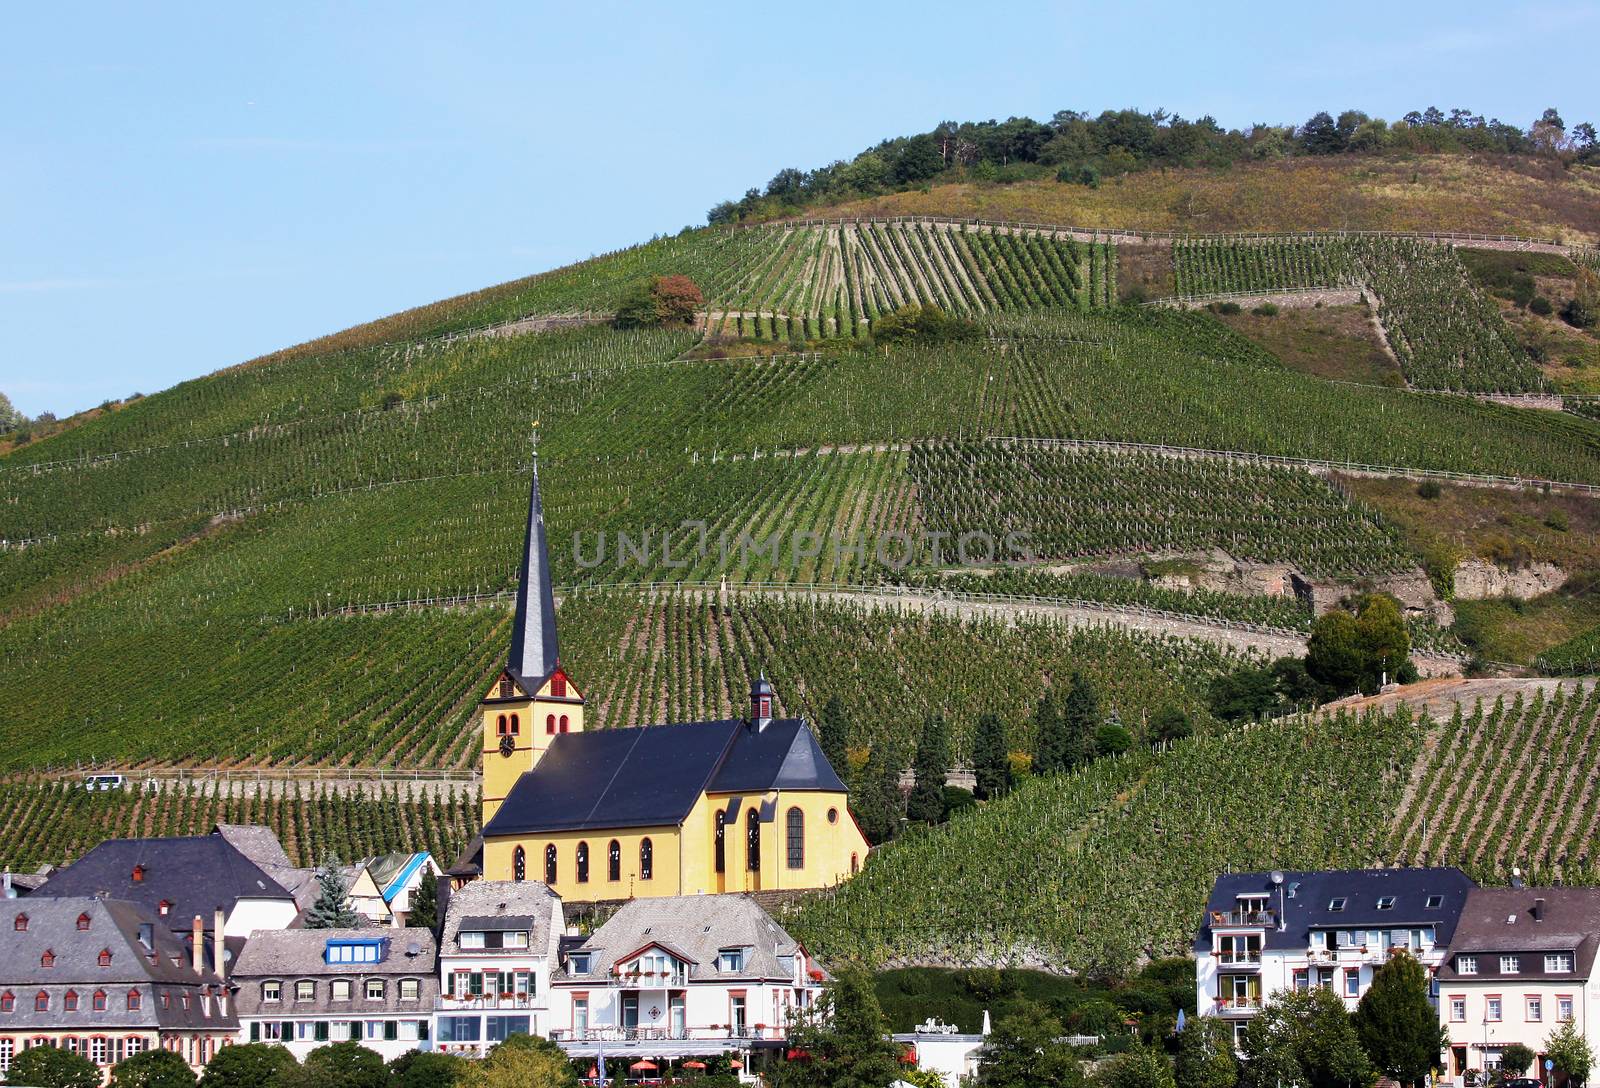 The Mosel valley is one of the most beautiful parts of Germany. On both sides of the river, romantic castles tower over endless vineyards, where excellent white grapes are grown
